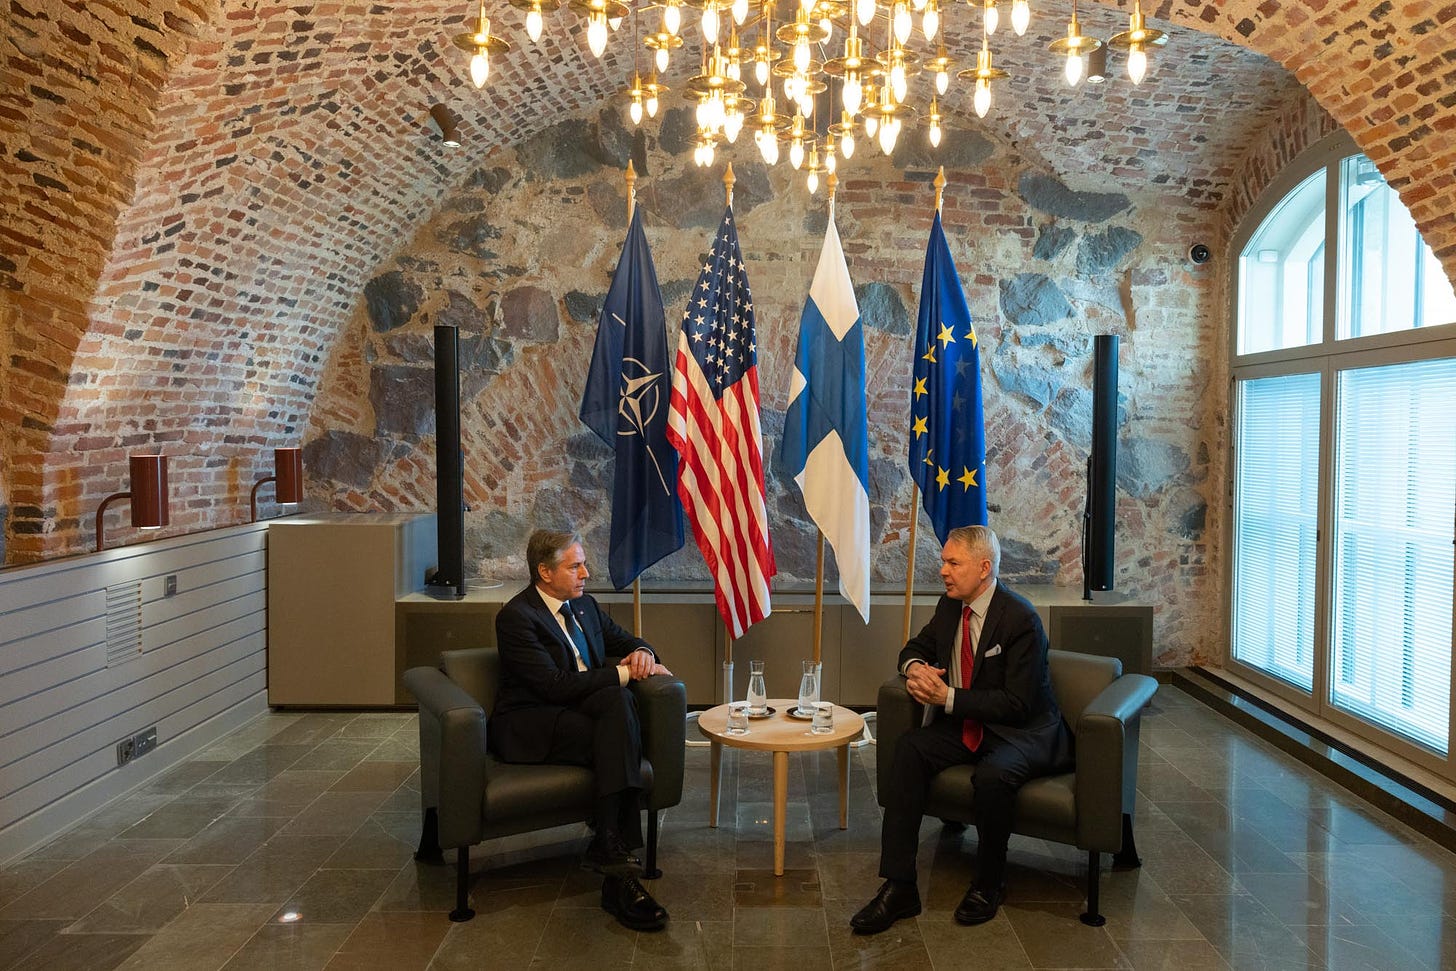 Secretary Blinken and Foreign Minister Haavisto sit in upholstered chairs with a small wooden table in the middle. Four flags sit behind them.